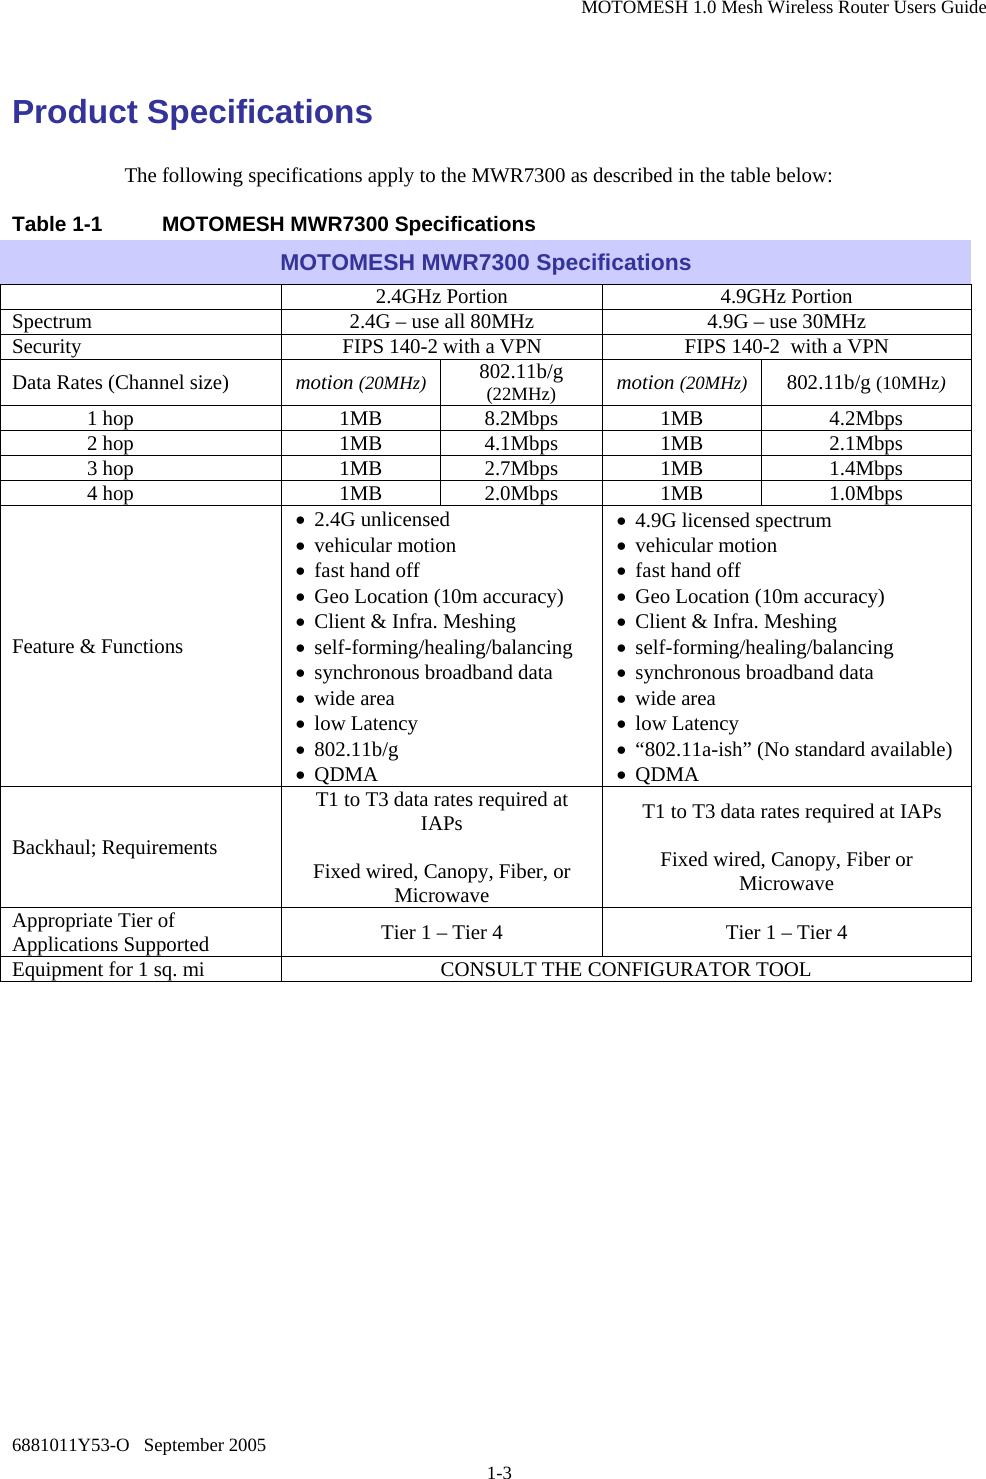 MOTOMESH 1.0 Mesh Wireless Router Users Guide 6881011Y53-O   September 2005 1-3 Product Specifications The following specifications apply to the MWR7300 as described in the table below: Table 1-1  MOTOMESH MWR7300 Specifications MOTOMESH MWR7300 Specifications   2.4GHz Portion  4.9GHz Portion Spectrum  2.4G – use all 80MHz  4.9G – use 30MHz Security  FIPS 140-2 with a VPN  FIPS 140-2  with a VPN Data Rates (Channel size)  motion (20MHz) 802.11b/g (22MHz)  motion (20MHz) 802.11b/g (10MHz) 1 hop  1MB 8.2Mbps 1MB  4.2Mbps 2 hop  1MB 4.1Mbps 1MB  2.1Mbps 3 hop  1MB 2.7Mbps 1MB  1.4Mbps 4 hop  1MB 2.0Mbps 1MB  1.0Mbps Feature &amp; Functions • 2.4G unlicensed • vehicular motion • fast hand off • Geo Location (10m accuracy) • Client &amp; Infra. Meshing • self-forming/healing/balancing • synchronous broadband data • wide area • low Latency • 802.11b/g • QDMA • 4.9G licensed spectrum • vehicular motion • fast hand off • Geo Location (10m accuracy) • Client &amp; Infra. Meshing • self-forming/healing/balancing • synchronous broadband data • wide area • low Latency • “802.11a-ish” (No standard available) • QDMA Backhaul; Requirements T1 to T3 data rates required at IAPs  Fixed wired, Canopy, Fiber, or Microwave   T1 to T3 data rates required at IAPs  Fixed wired, Canopy, Fiber or Microwave Appropriate Tier of Applications Supported  Tier 1 – Tier 4  Tier 1 – Tier 4 Equipment for 1 sq. mi  CONSULT THE CONFIGURATOR TOOL 